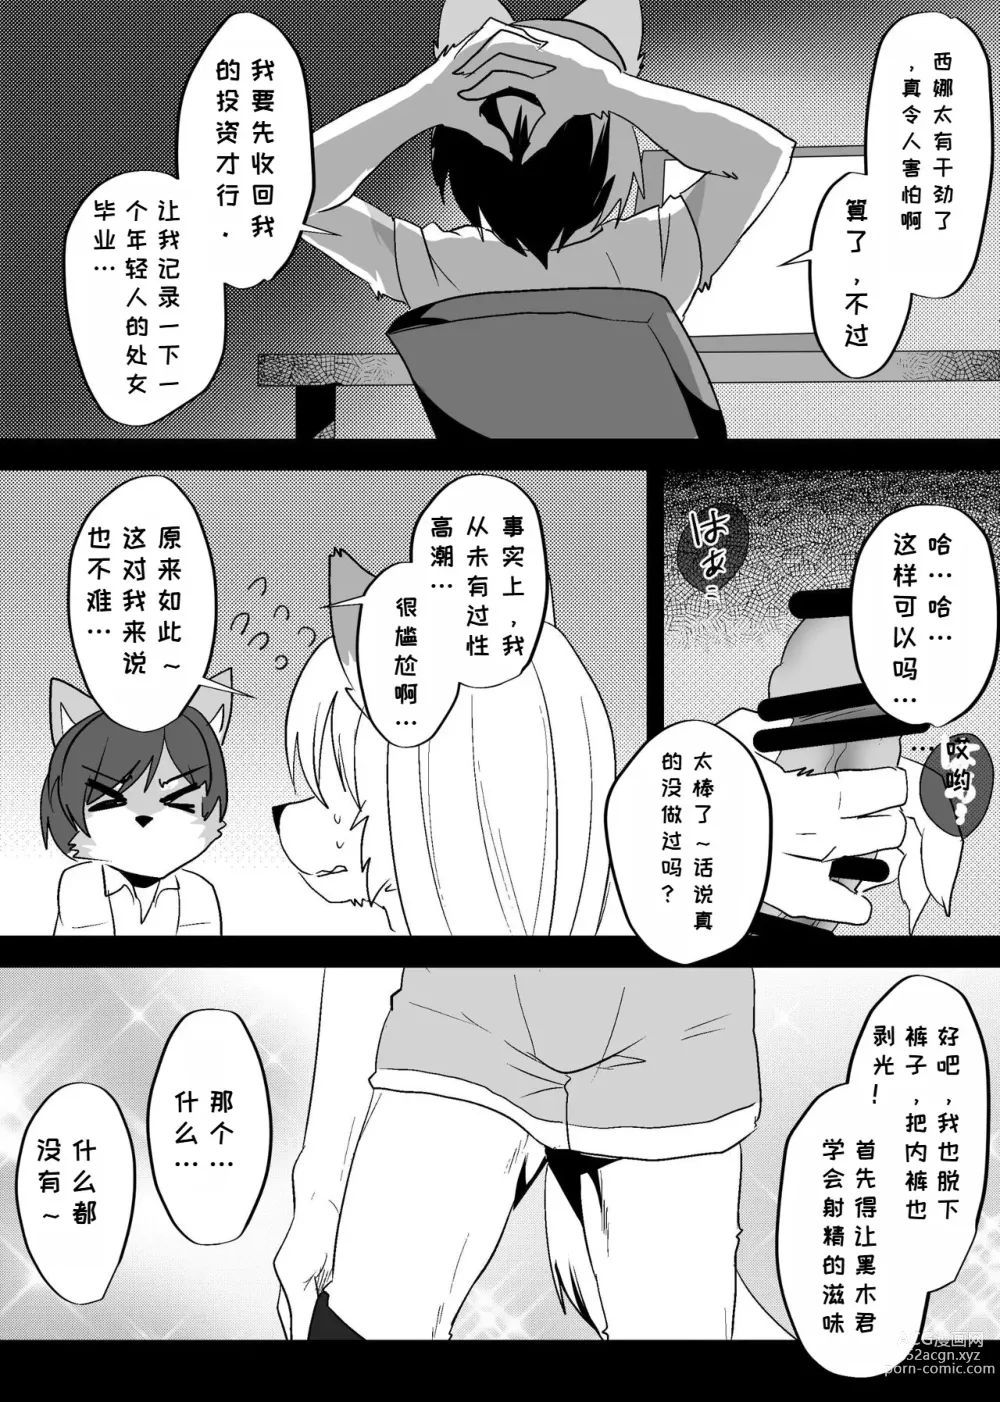 Page 16 of doujinshi 我们发情出勤科 3